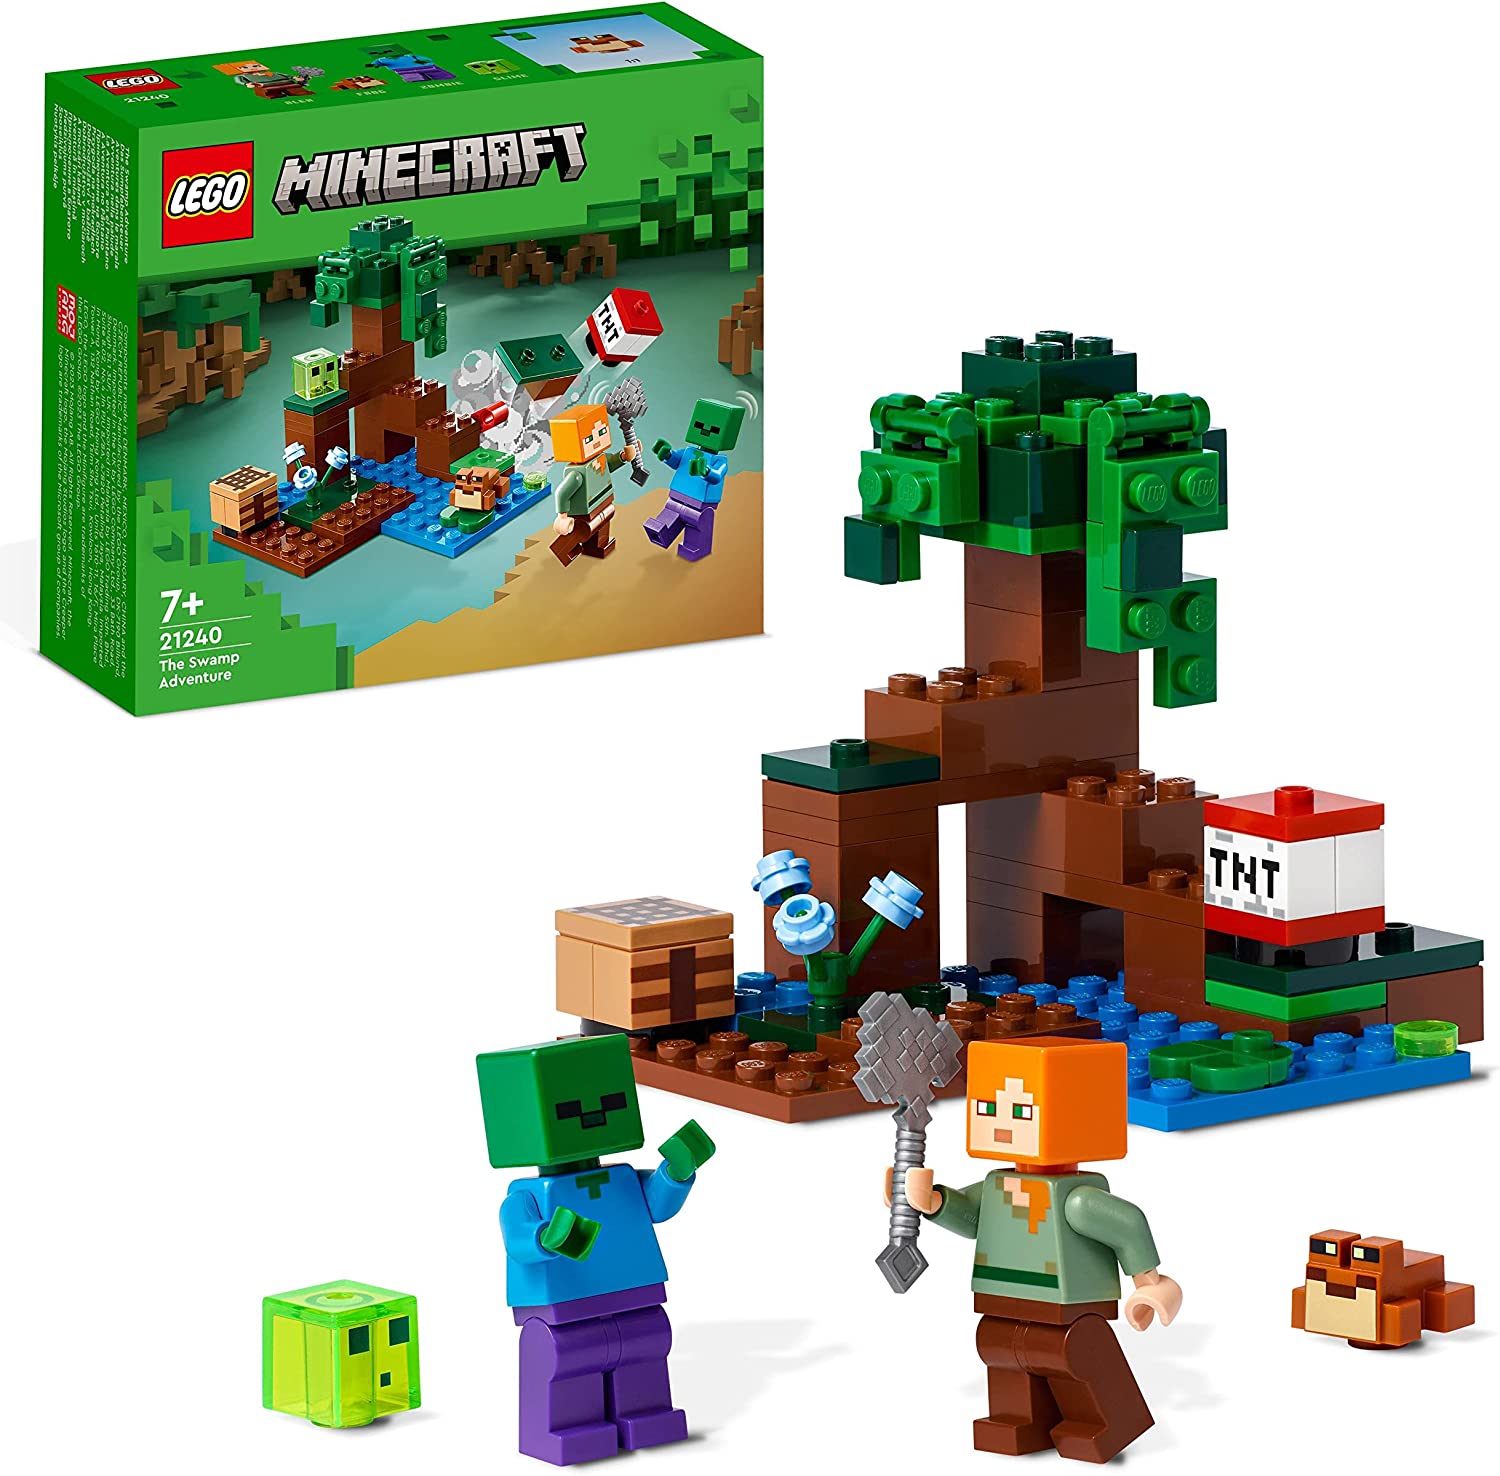 LEGO 21240 Minecraft The Swamp Adventure Set, Toy with Figures with Alex and Zombie Figures in Biom, Birthday Gift for Children from 8 Years